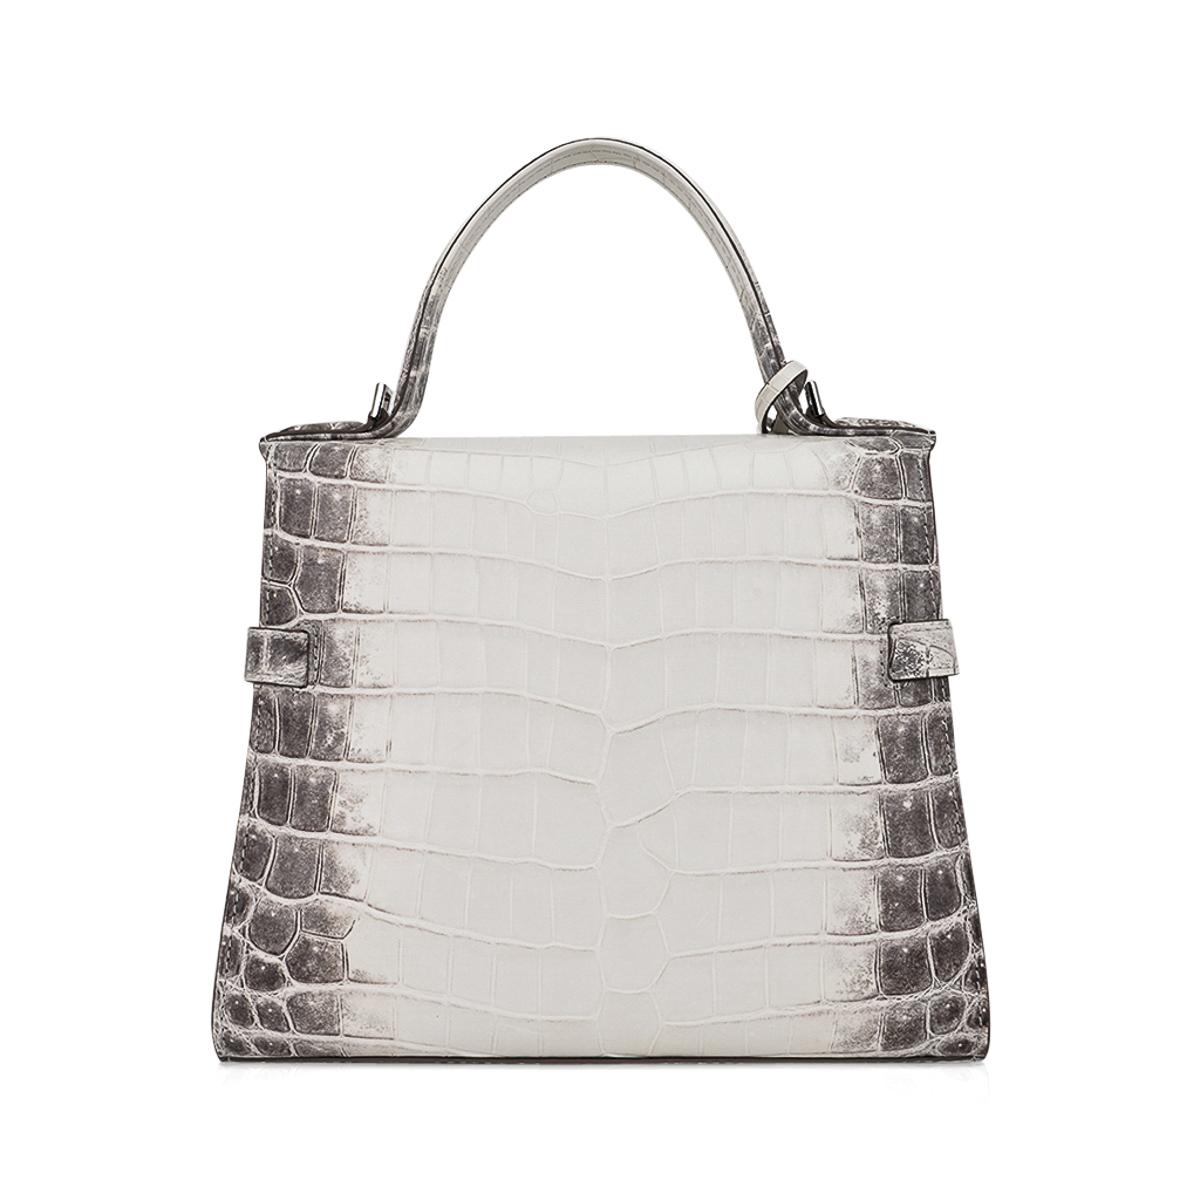 Delvaux Tempete PM Himalaya Crocodile Limited Edition Bag In New Condition For Sale In Miami, FL